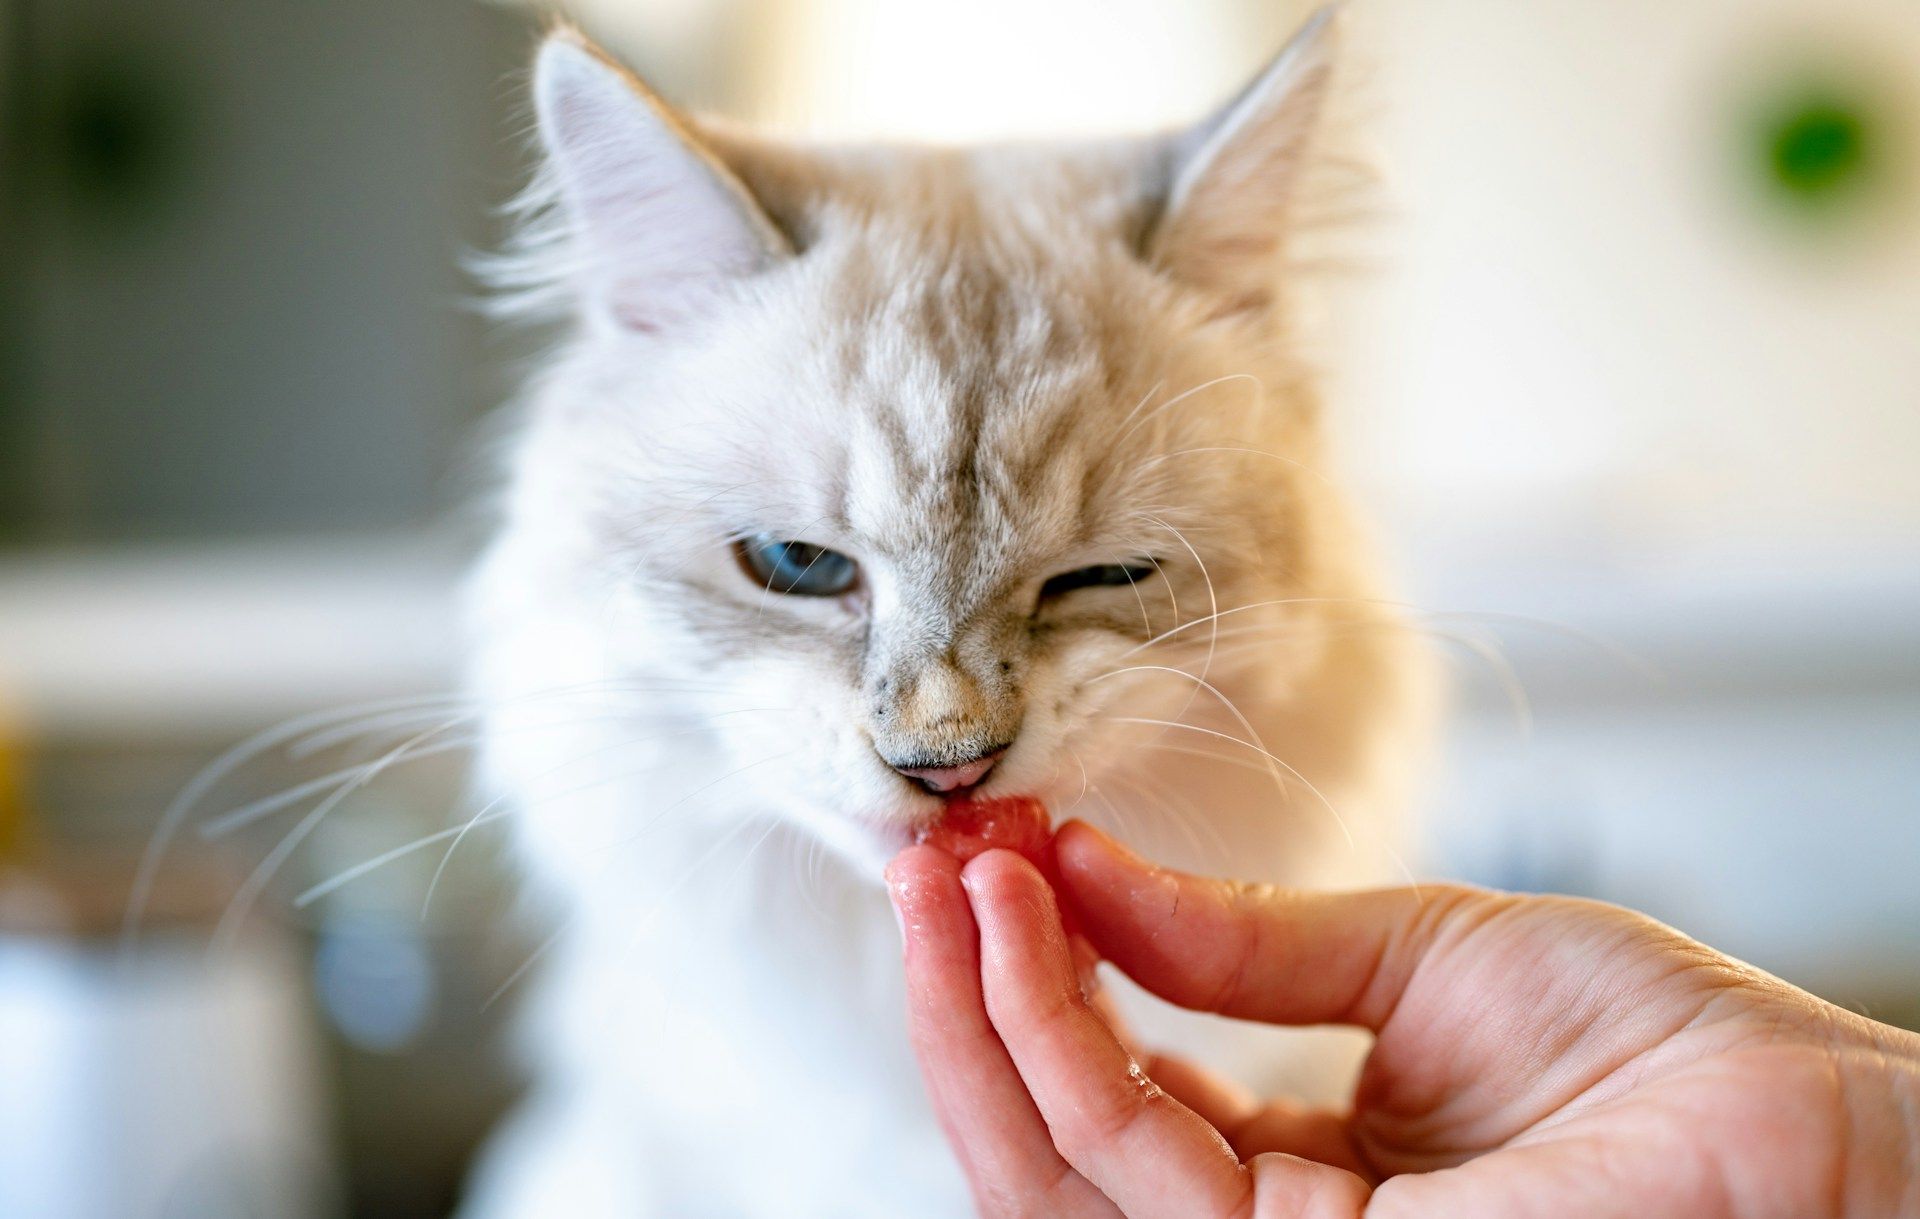 A white cat eating a red fruit, image from Unsplash